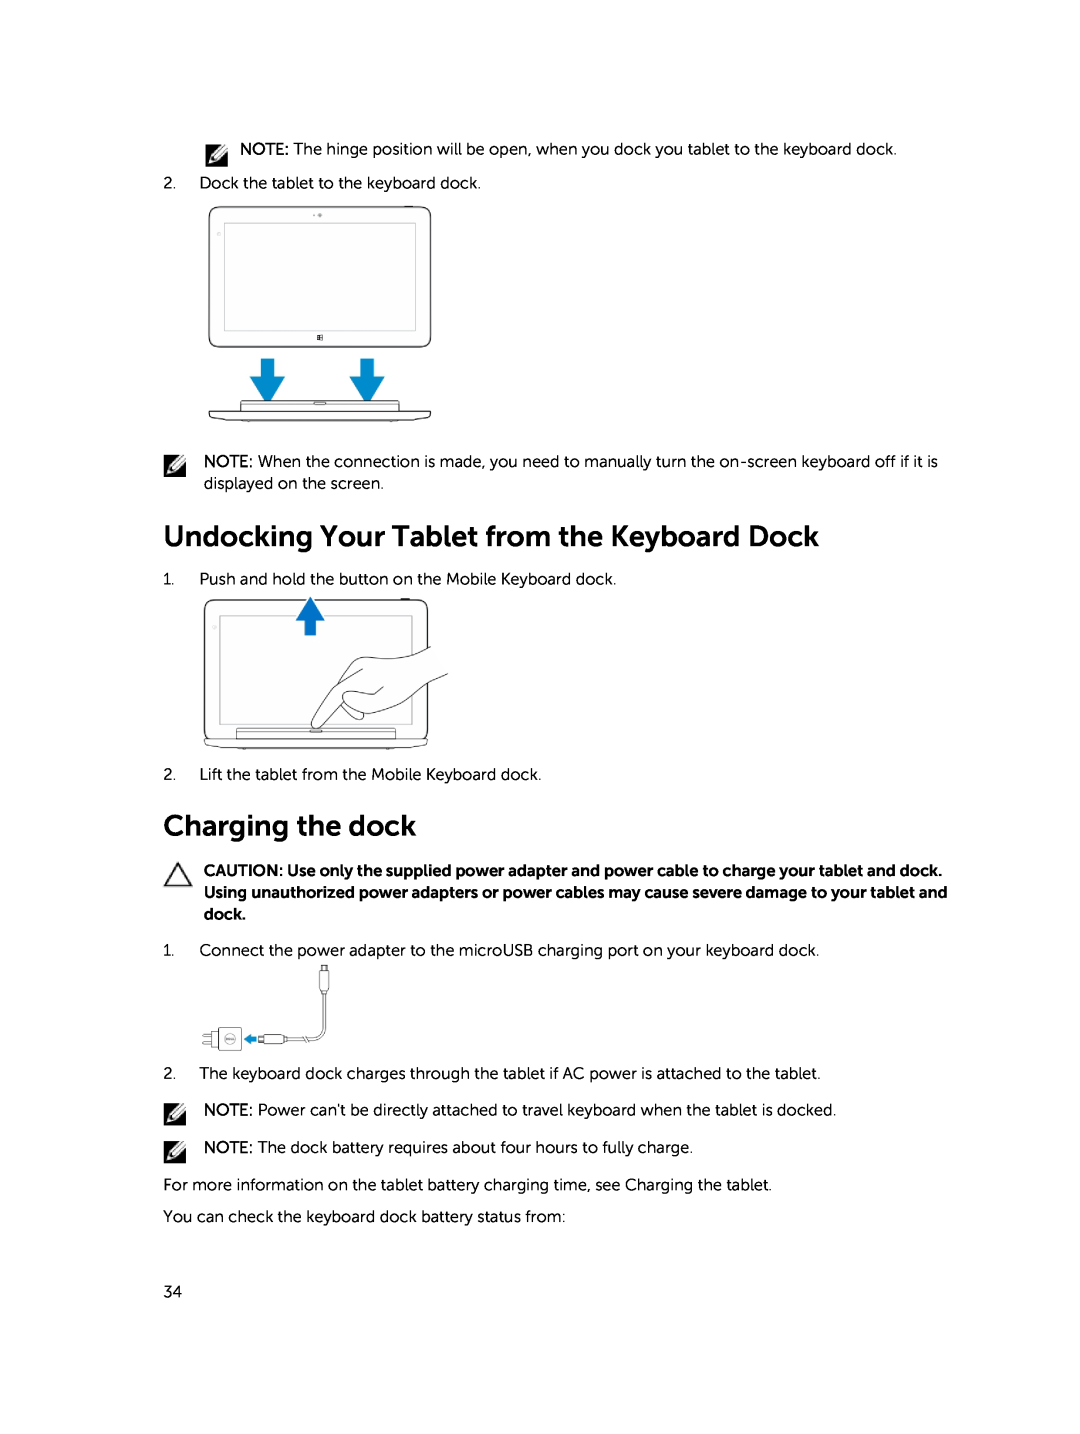 Dell T07G manual Undocking Your Tablet from the Keyboard Dock, Charging the dock 